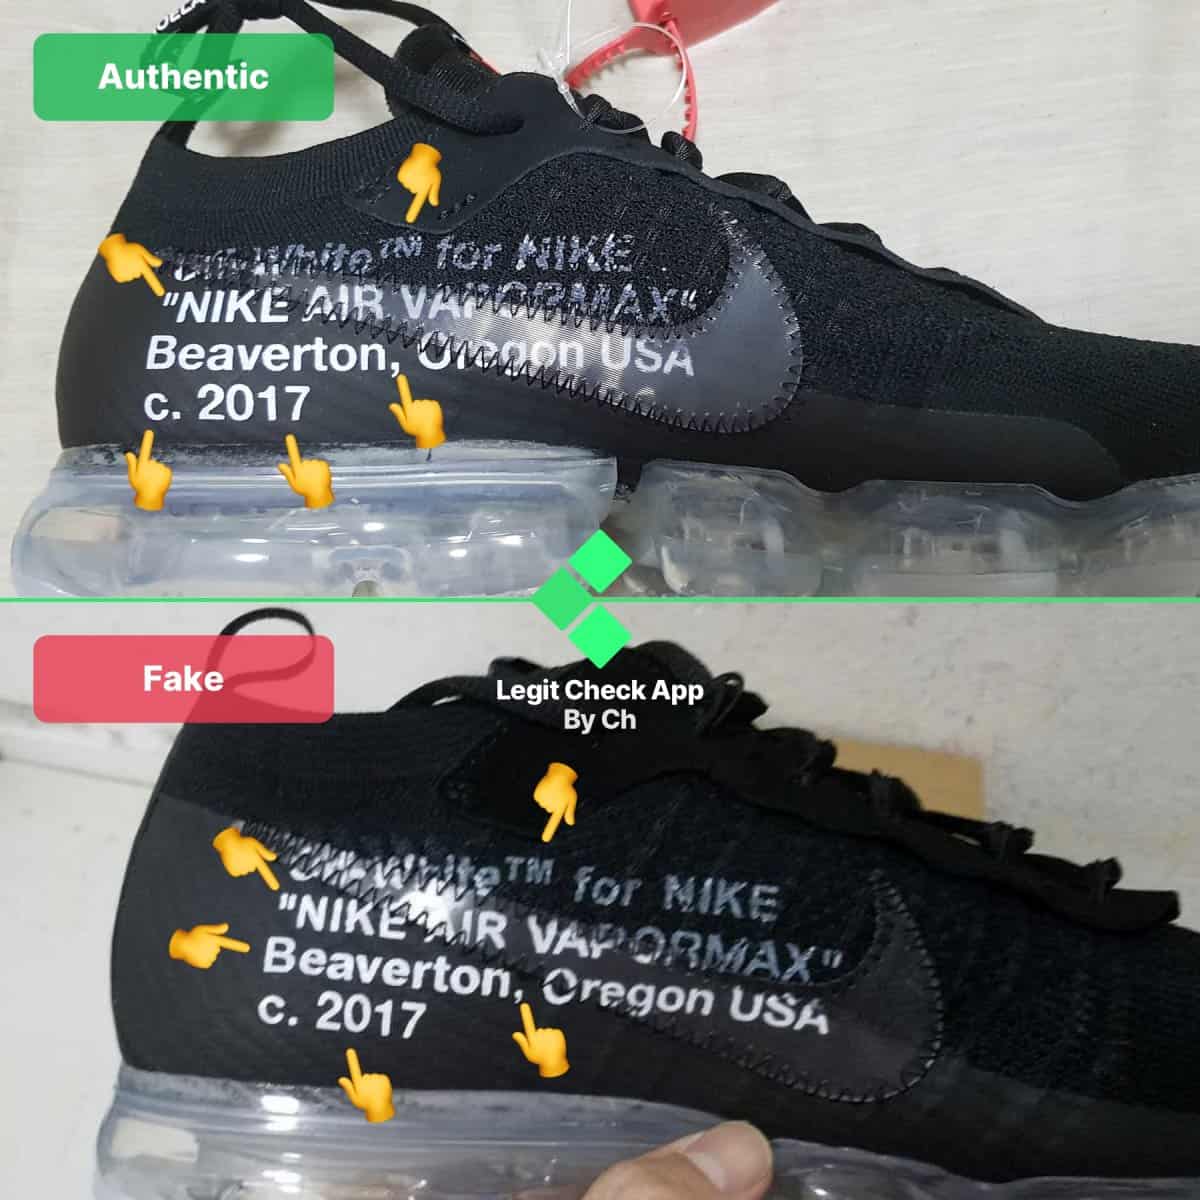 how to spot fake off-white vapormax